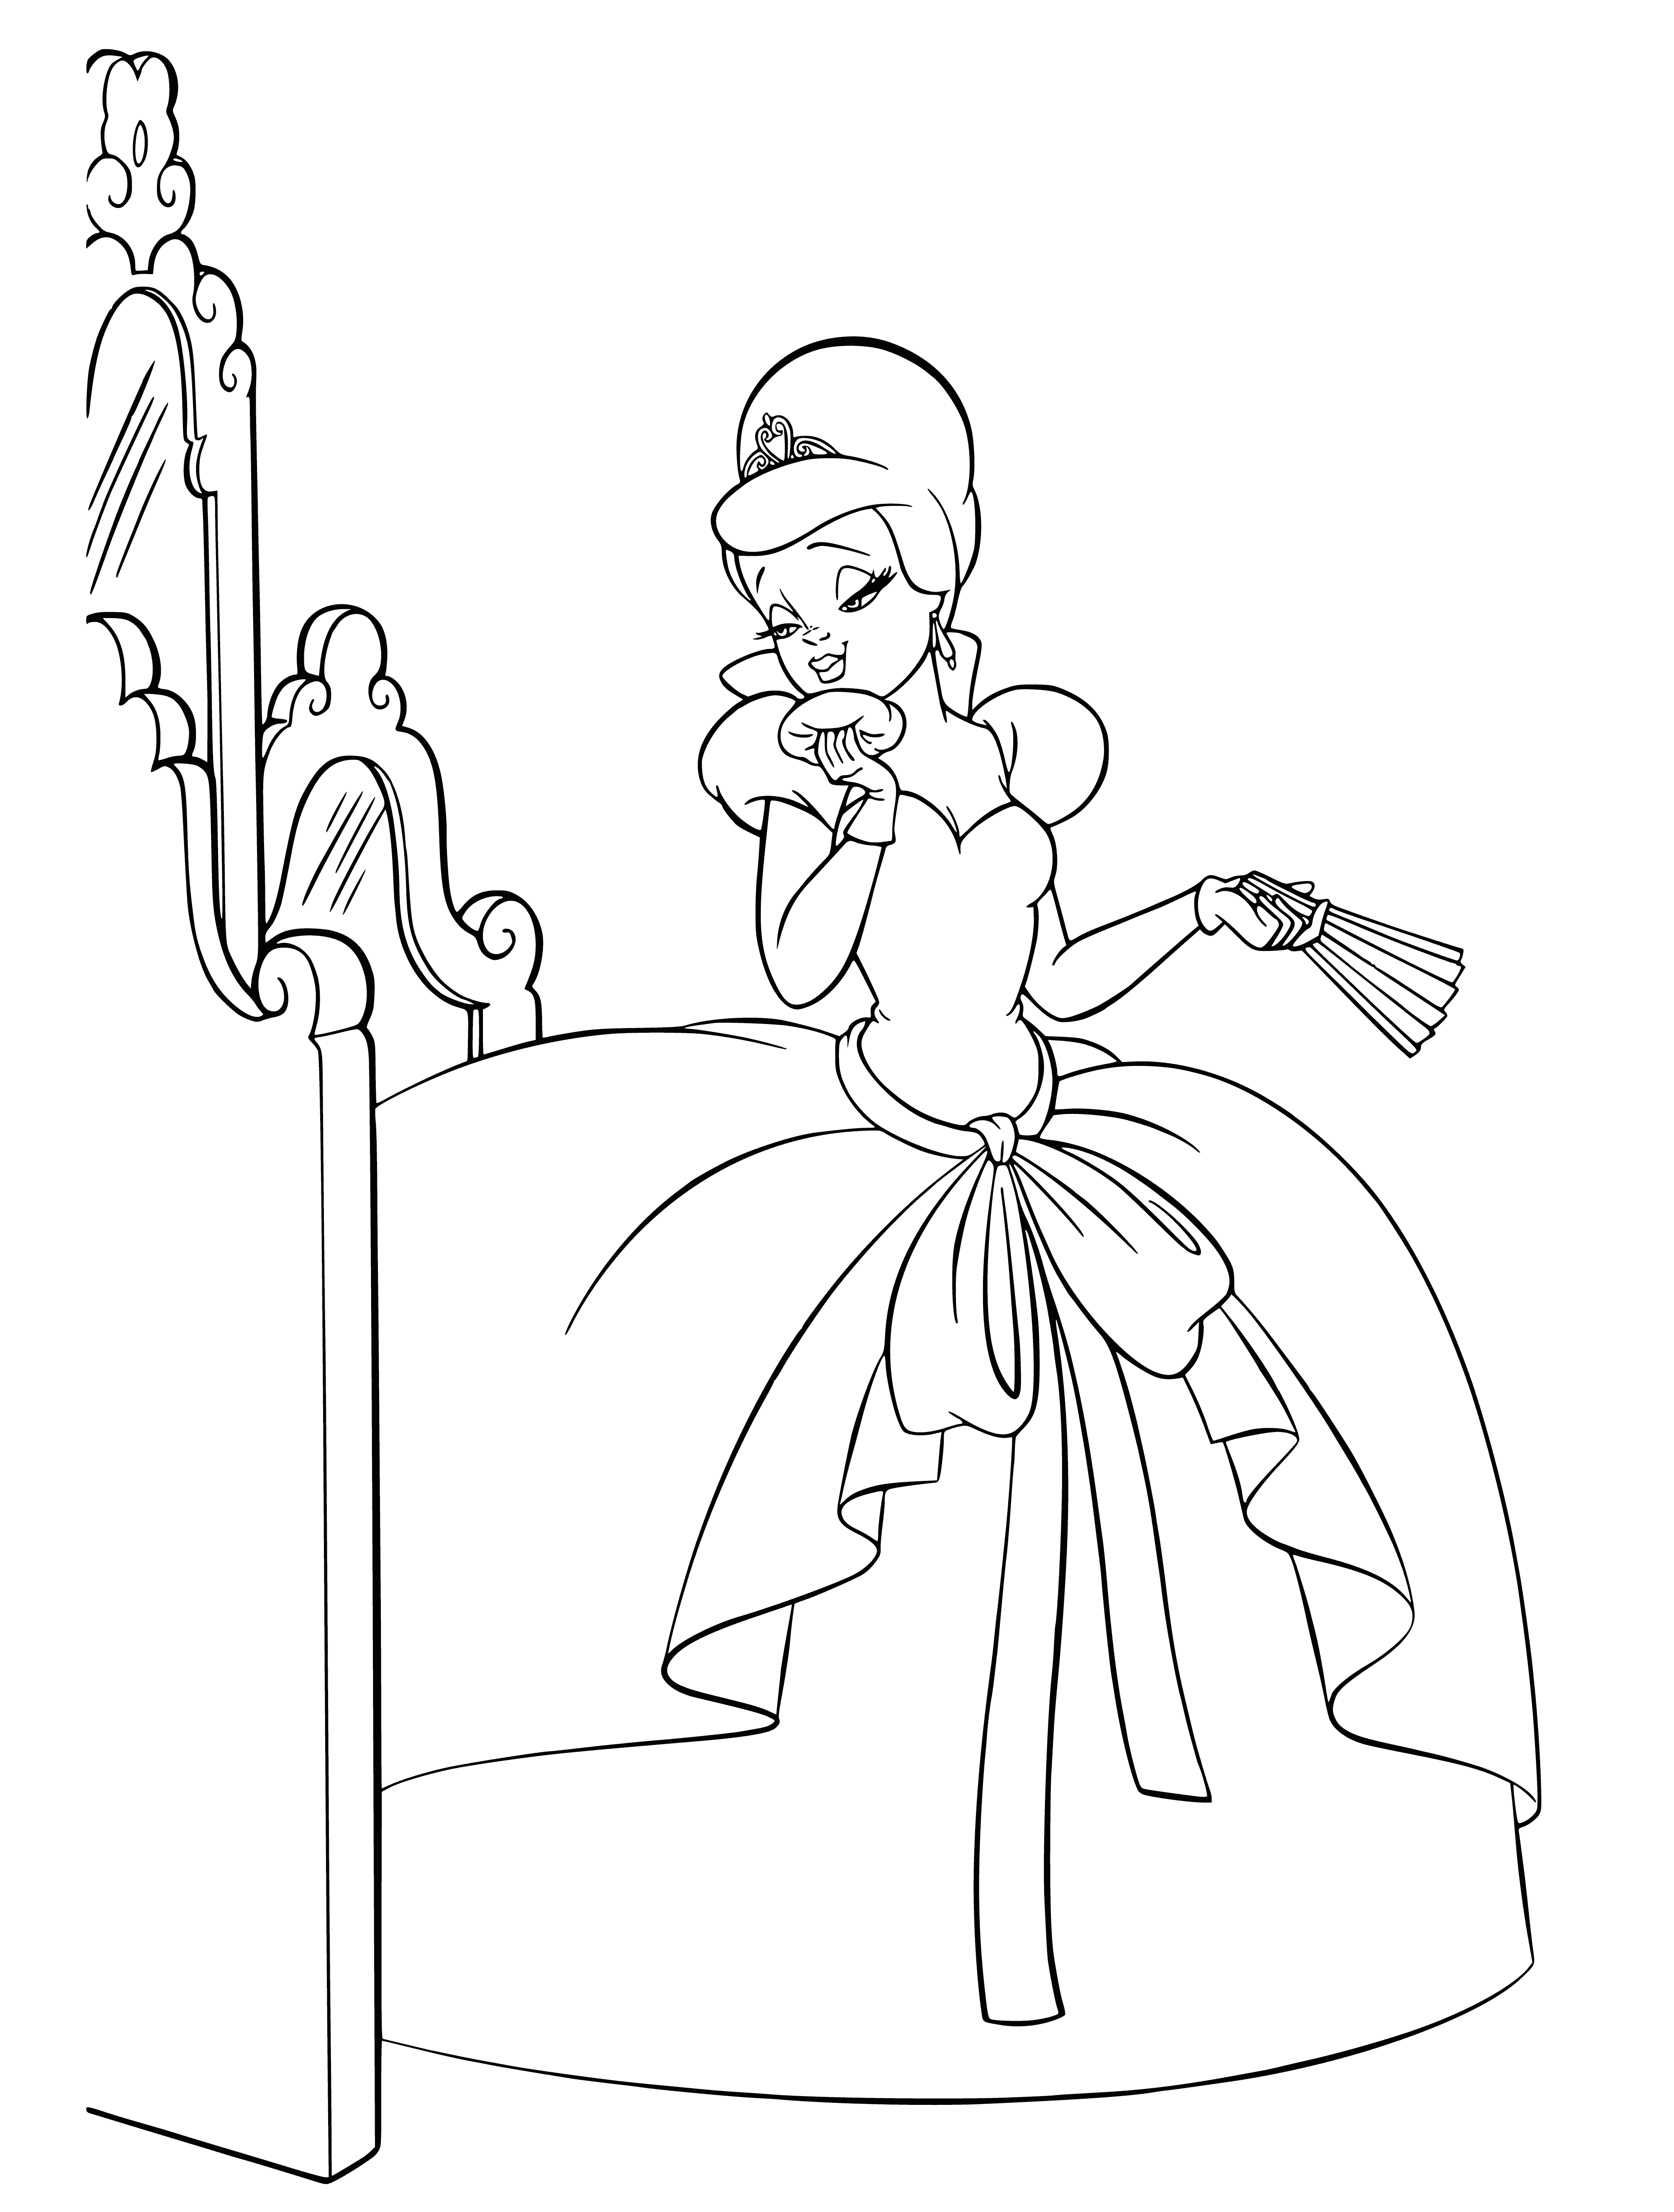 coloring page: Tiana & Charlotte stand at a green door, Tiana holding a key. Charlotte smiles & excitedly awaits the surprise.